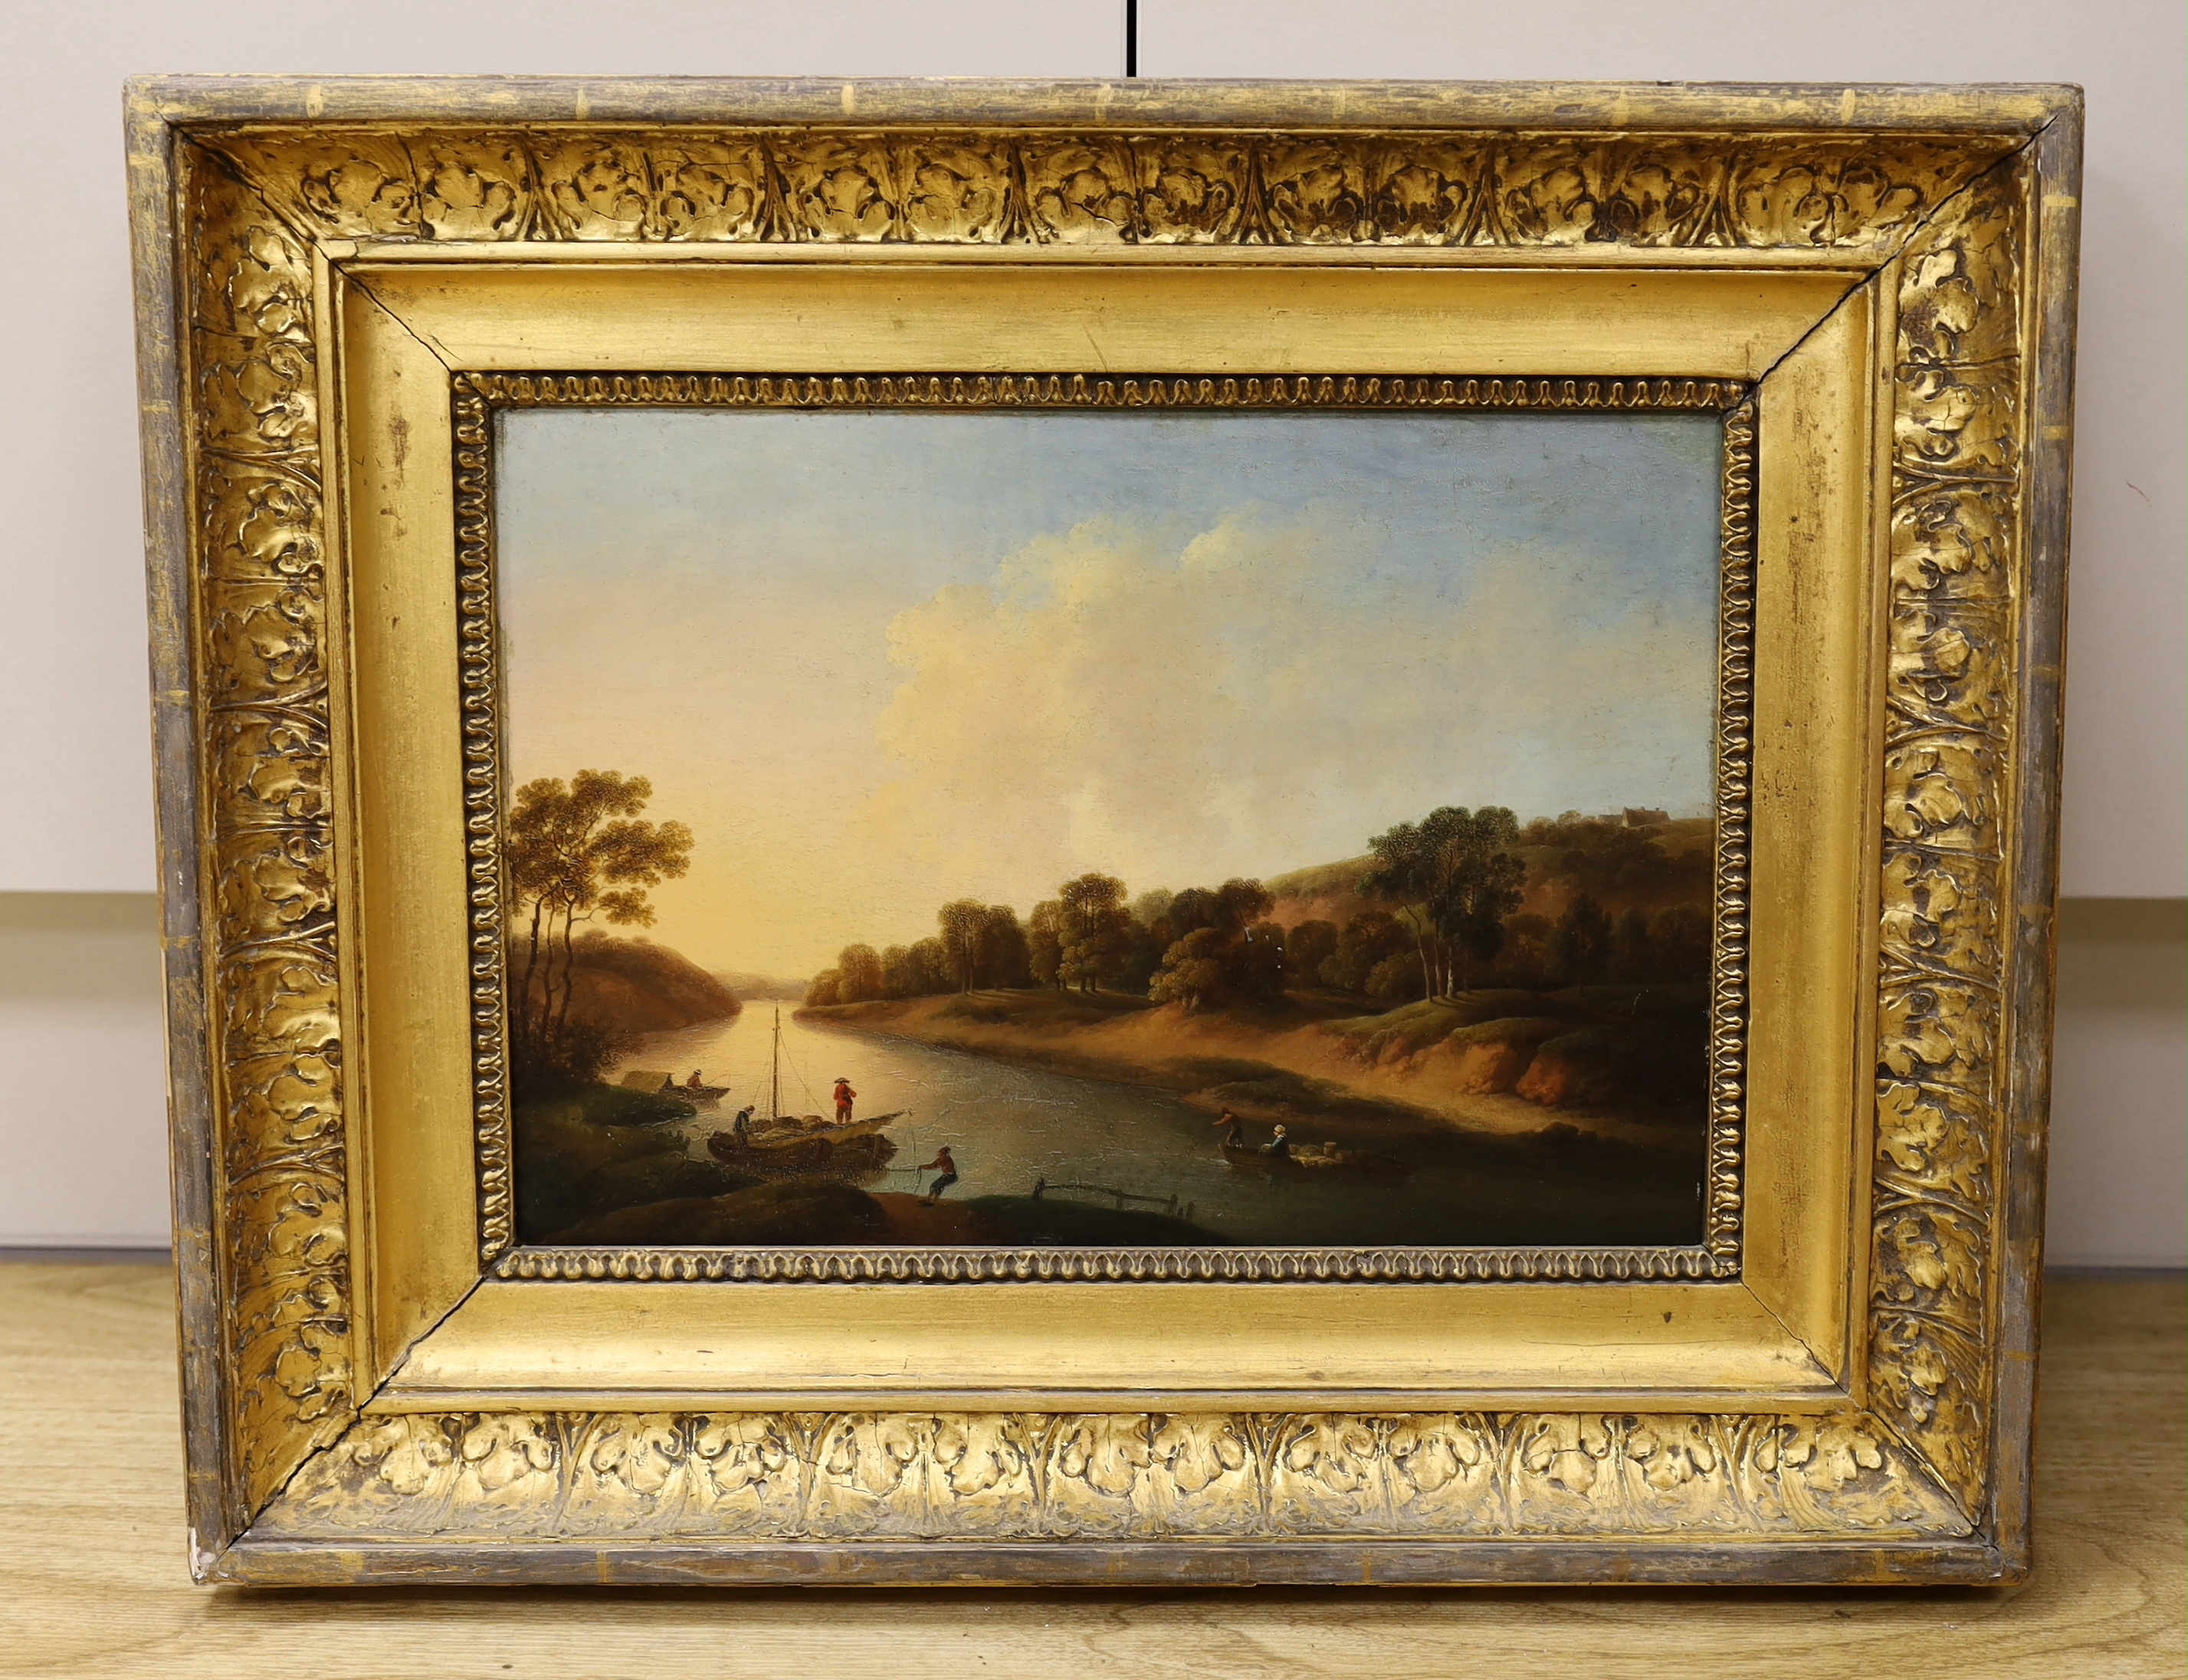 19th century English School, oil on panel, River landscape with figures and boats, 33 x 23cm